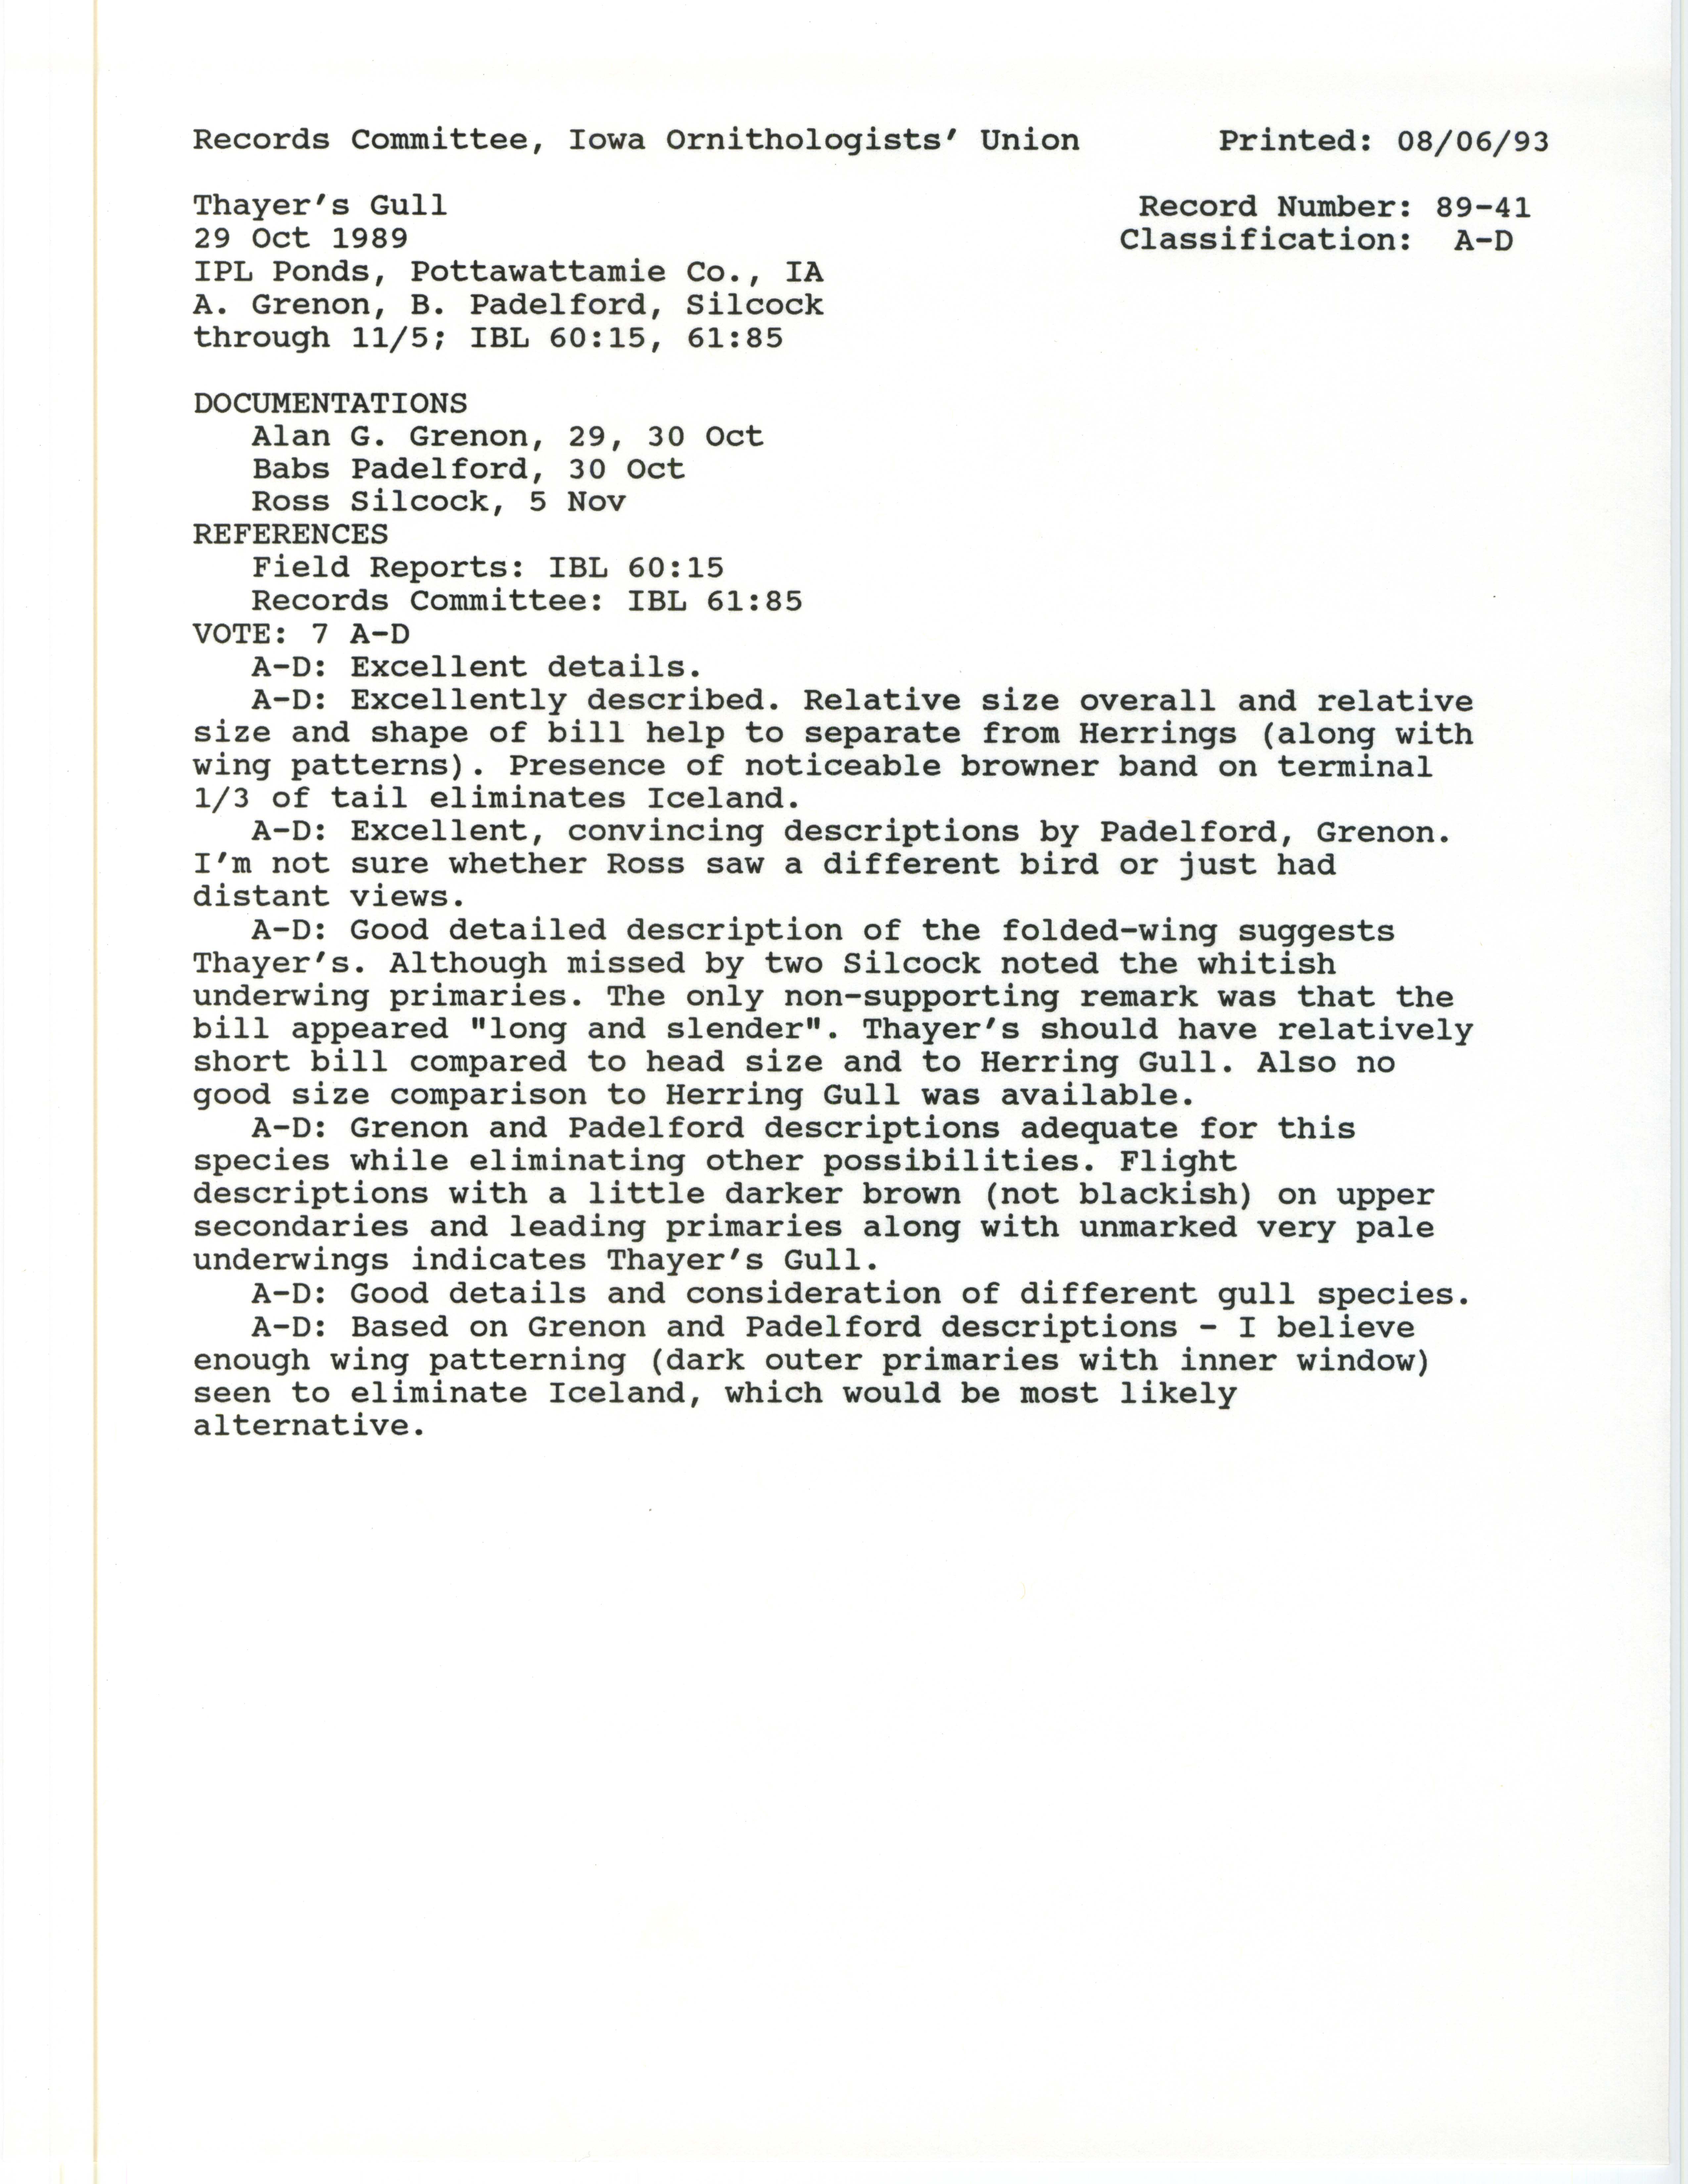 Records Committee review for rare bird sighting of Thayer's Gull at IPL Ponds in Pottawattamie County, 1989